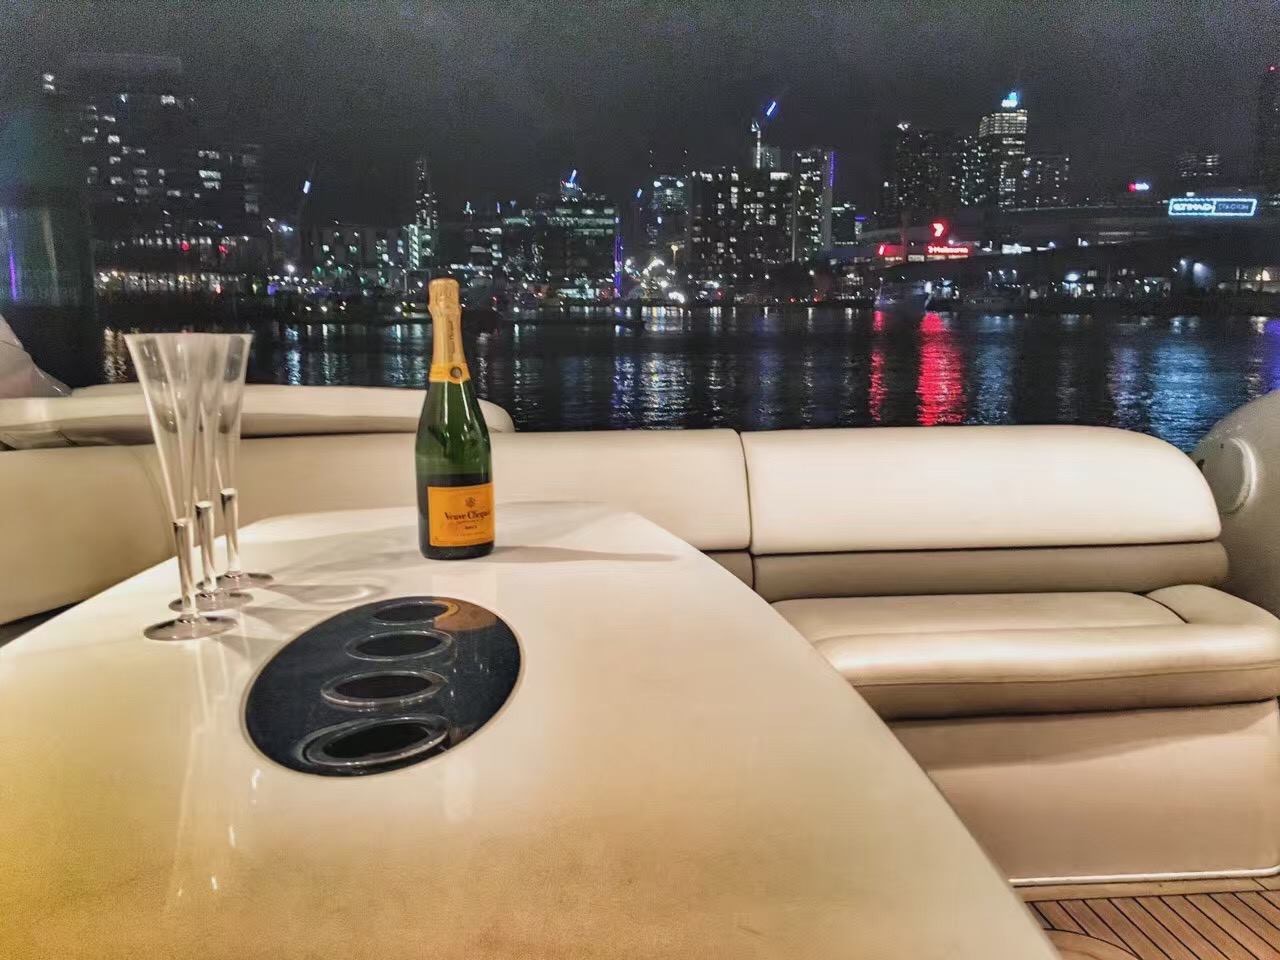 small yacht hire melbourne